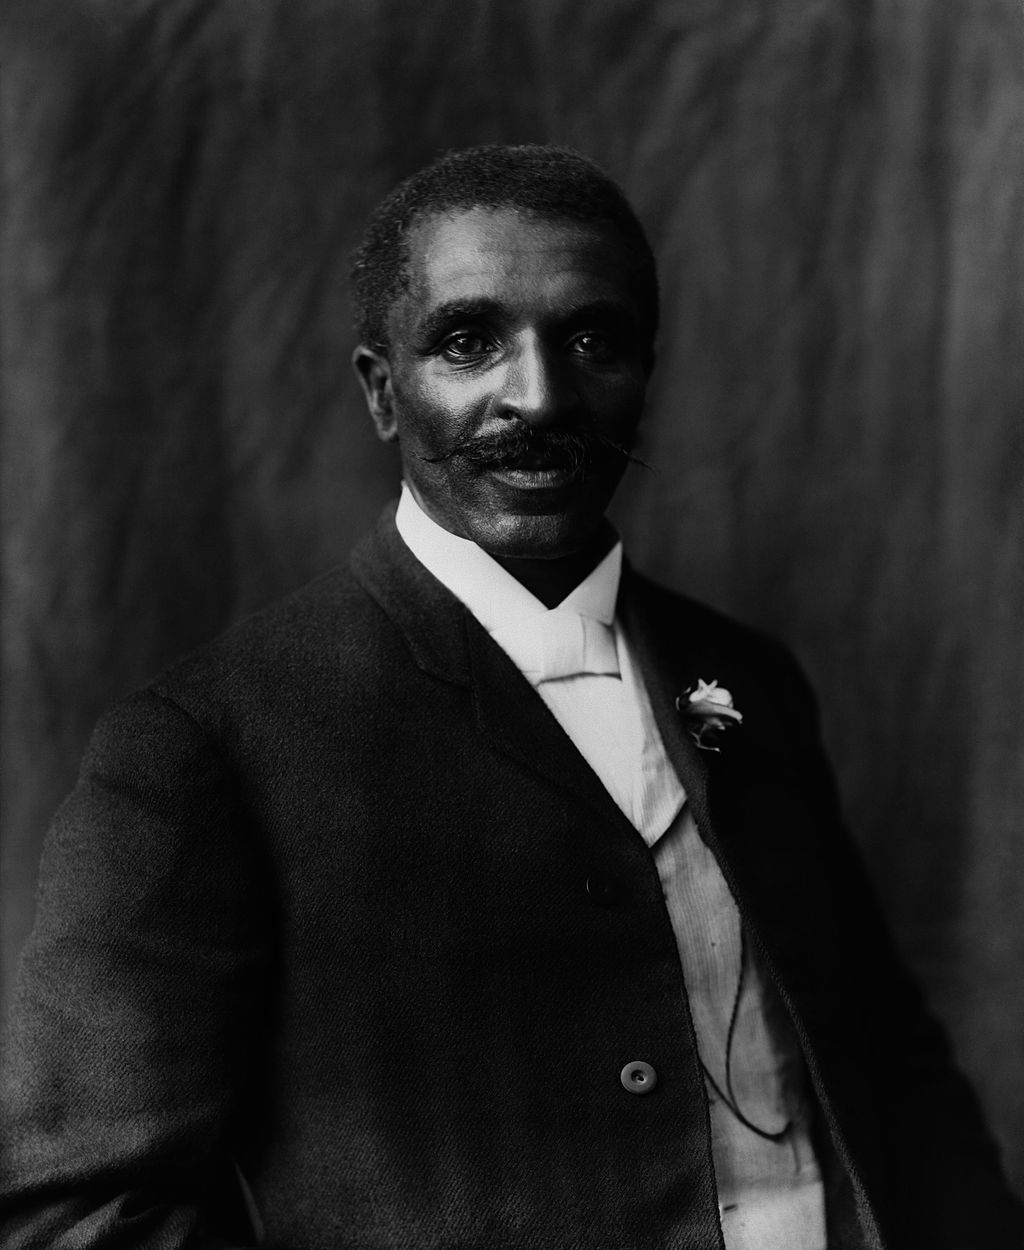 Specimens from George Washington Carver discovered at UW-Madison